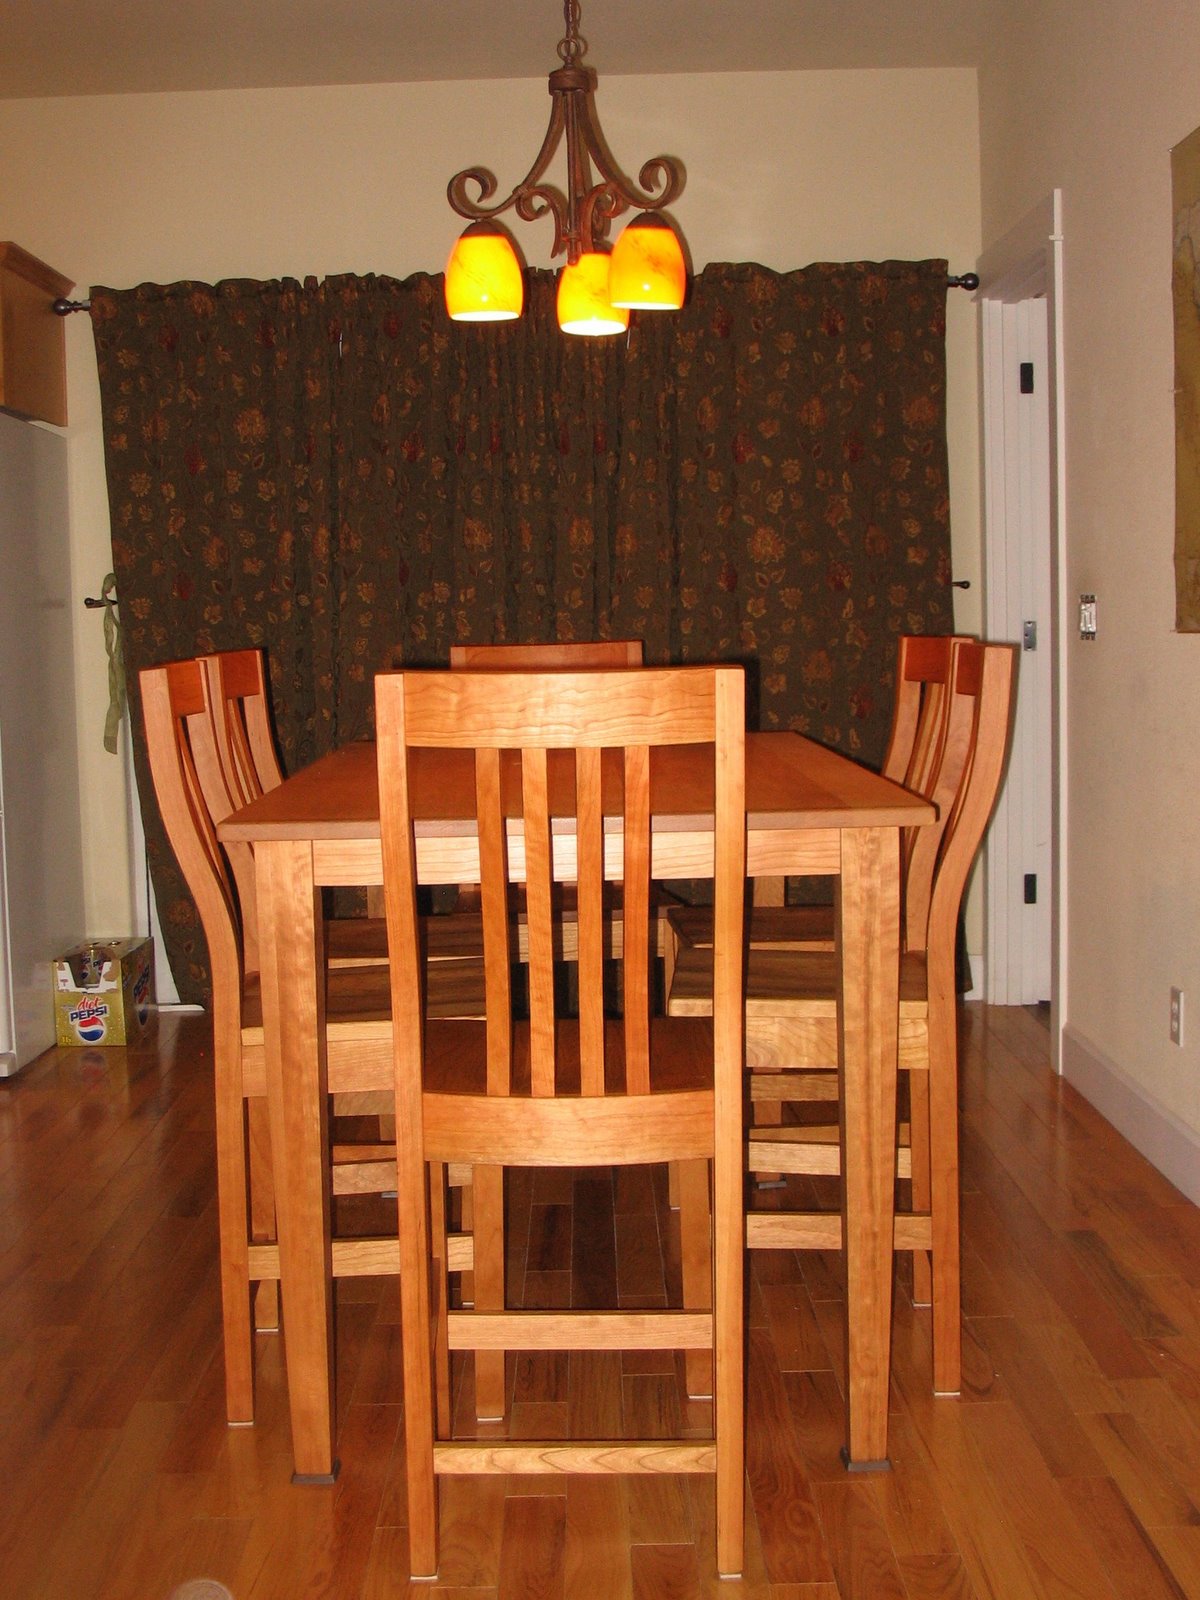 [Dining+Table+and+Lights.jpg]